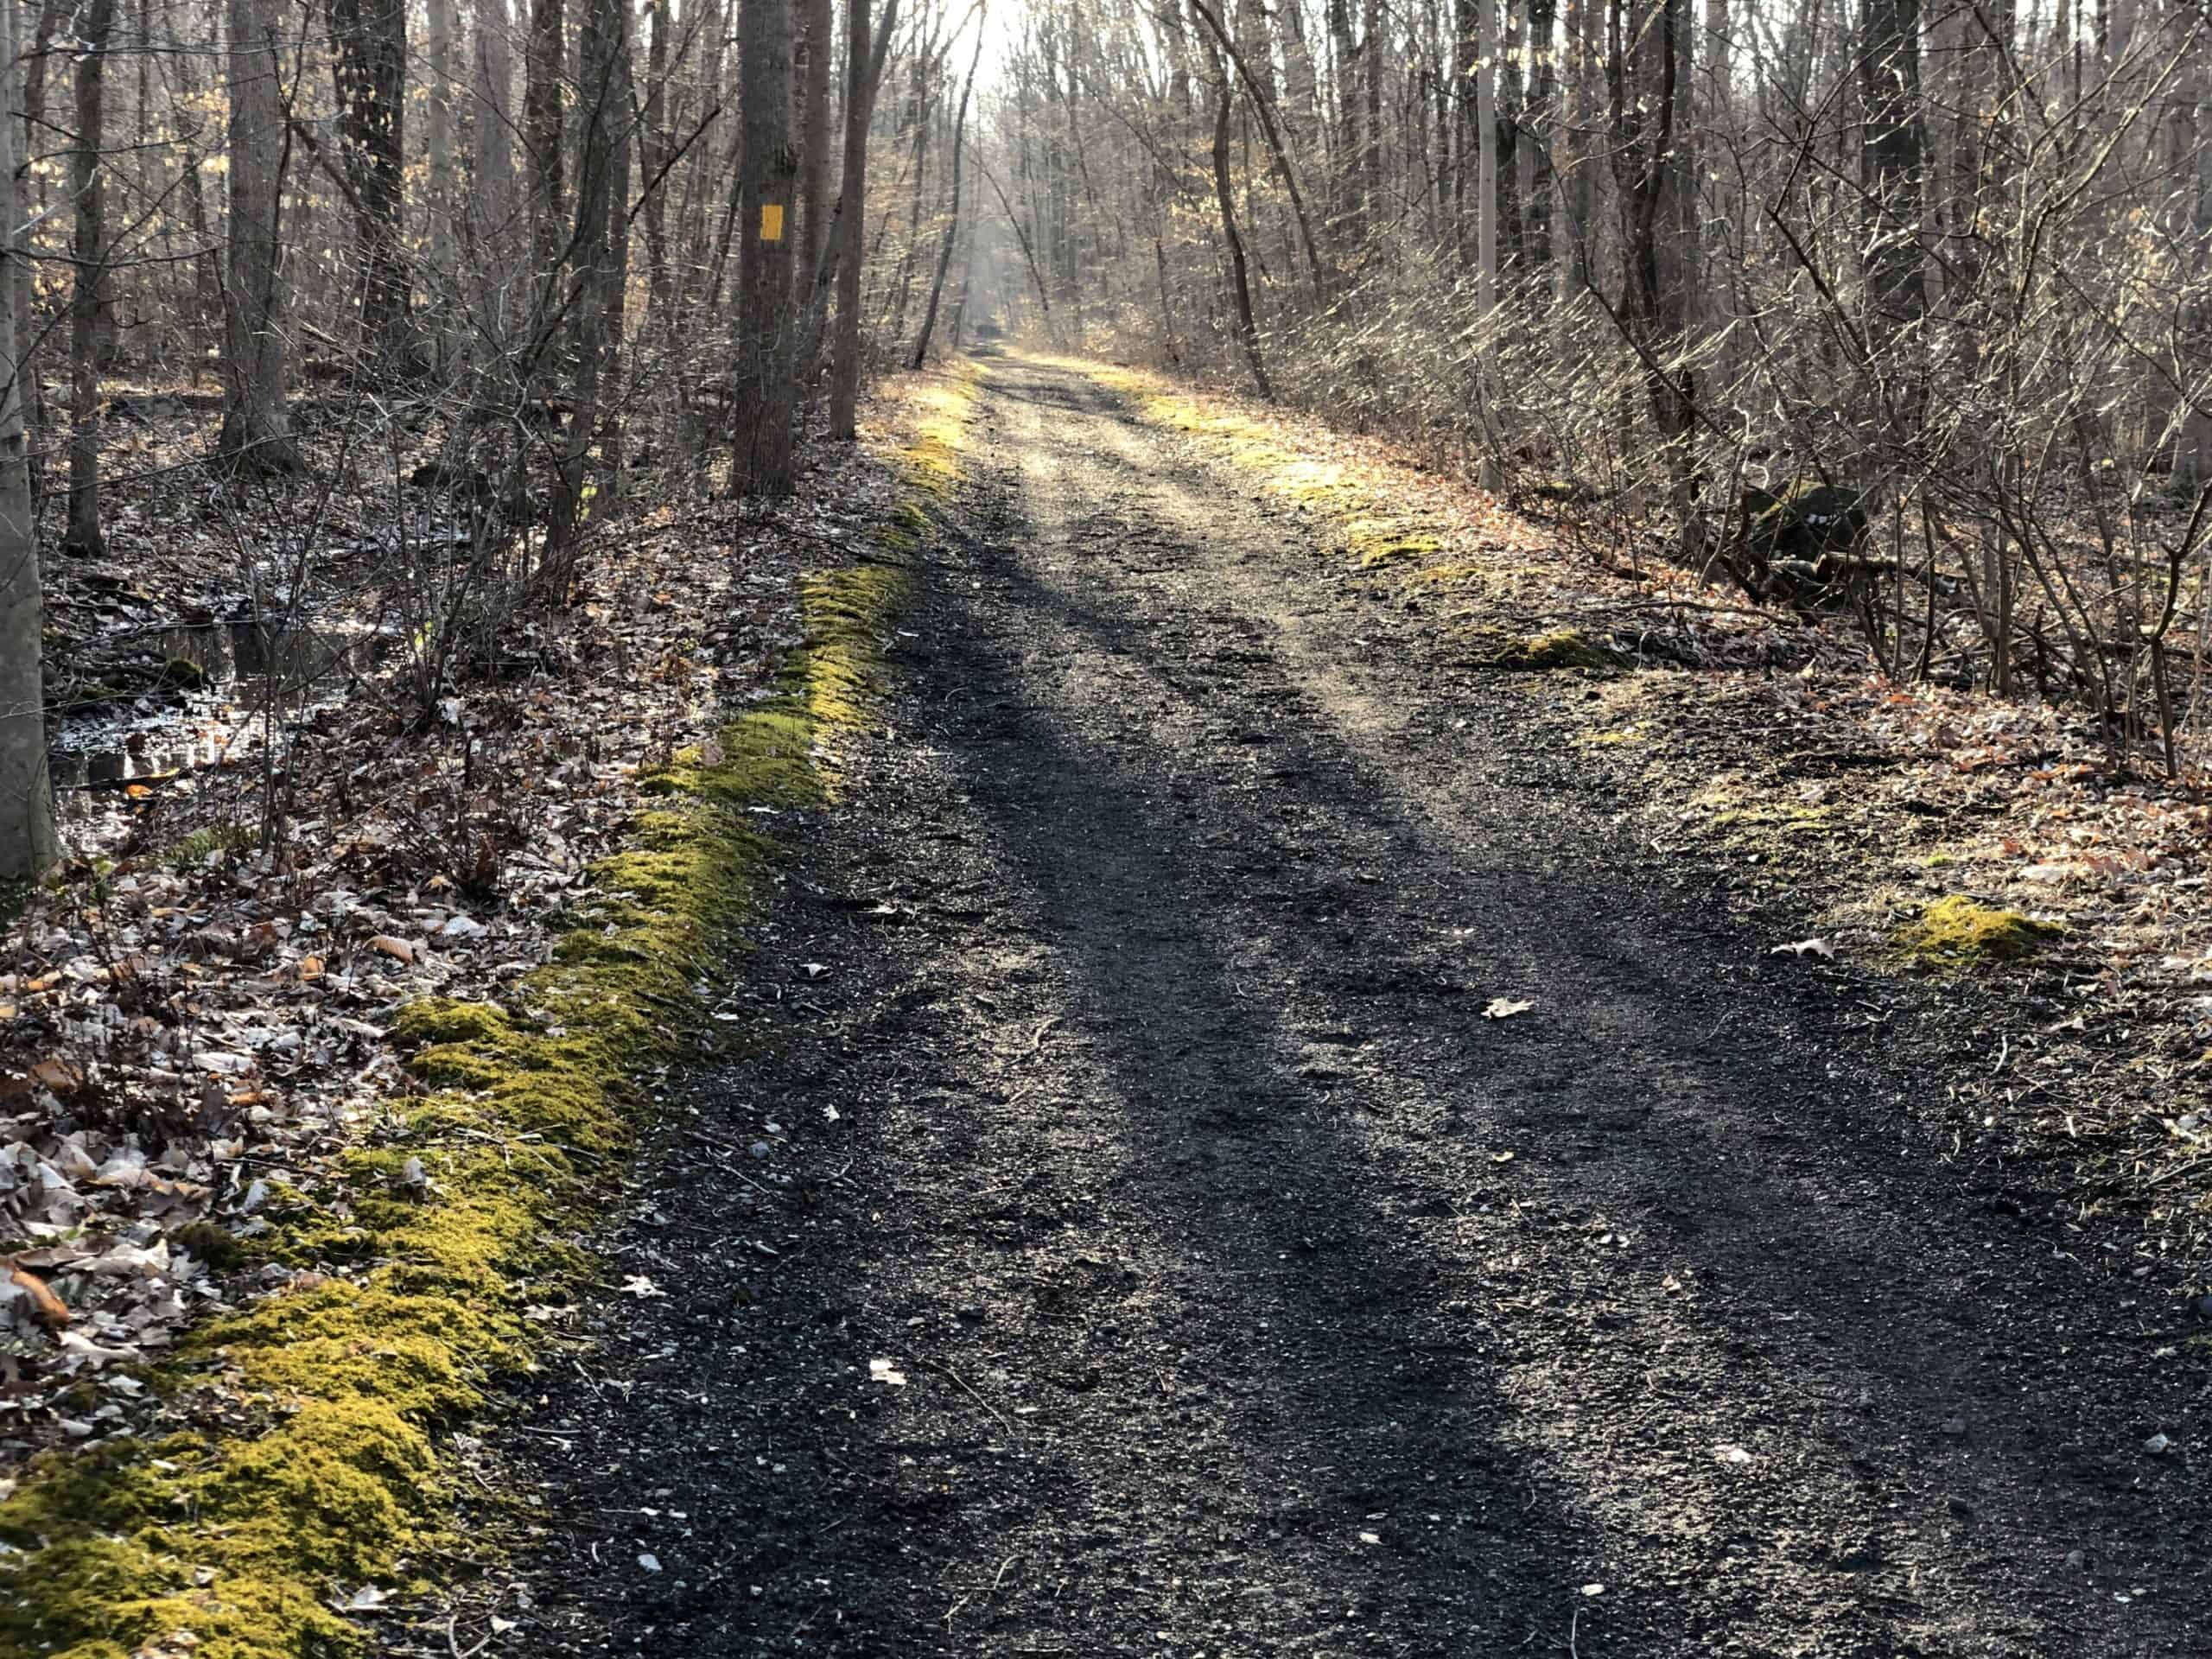 A long straight path through the woods (Horse-Shoe Trail at Crow's Nest)